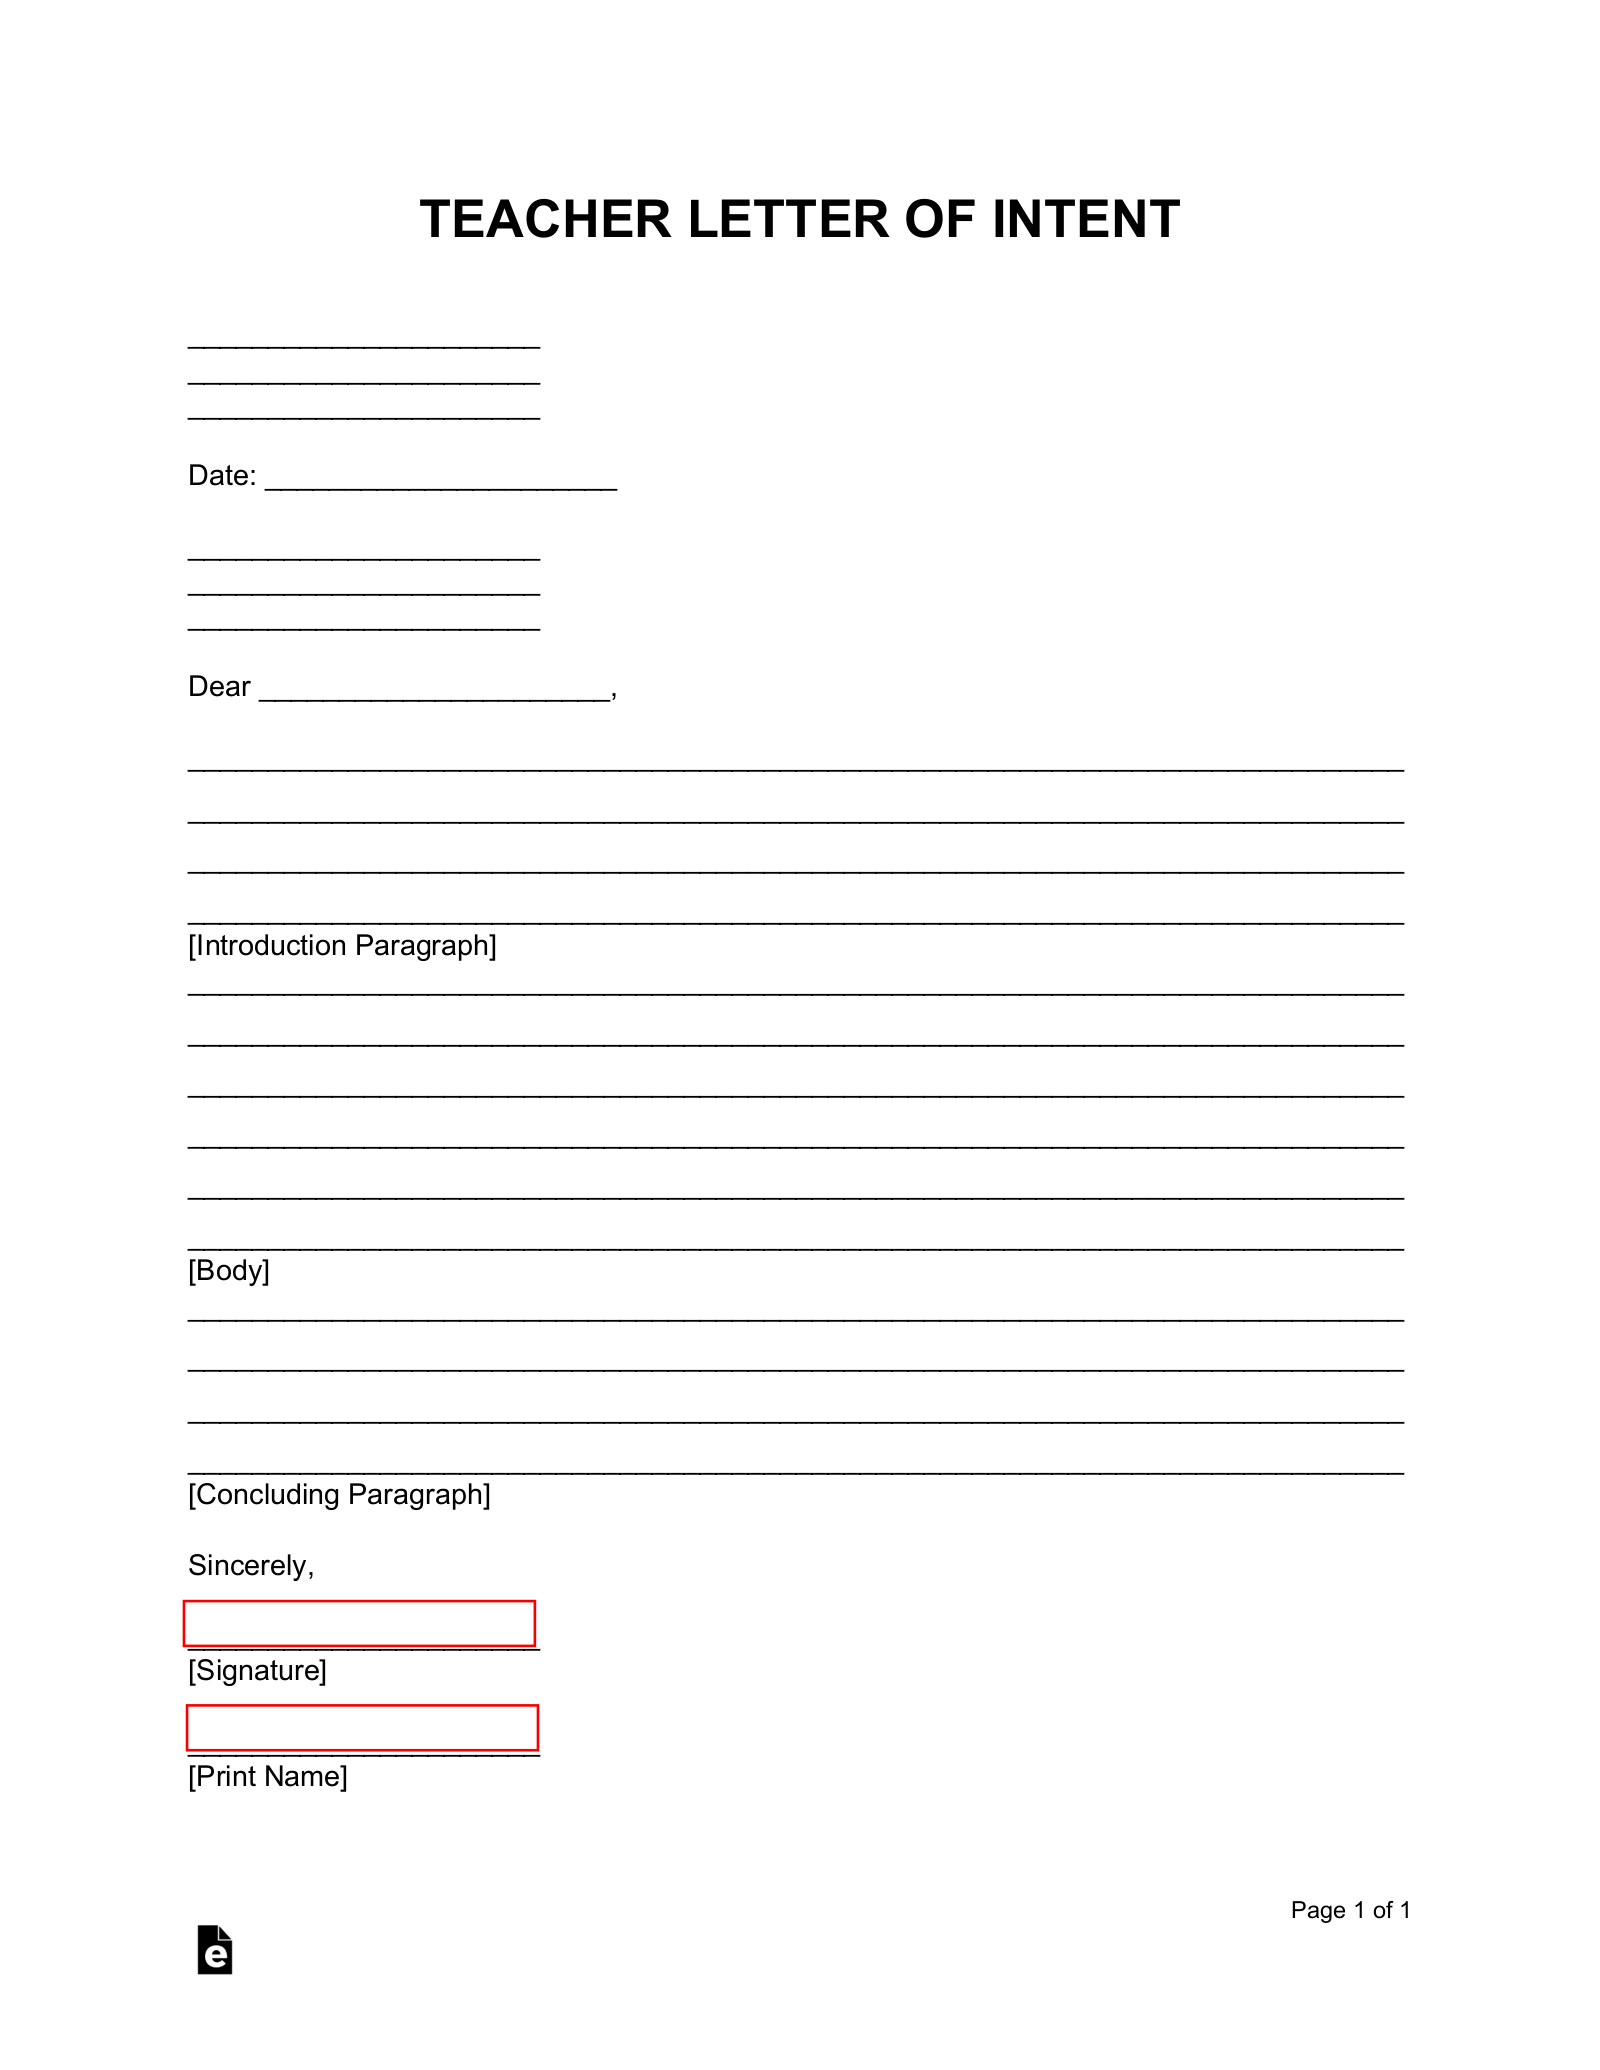 Letter Of Interest Format For Teaching Position from eforms.com